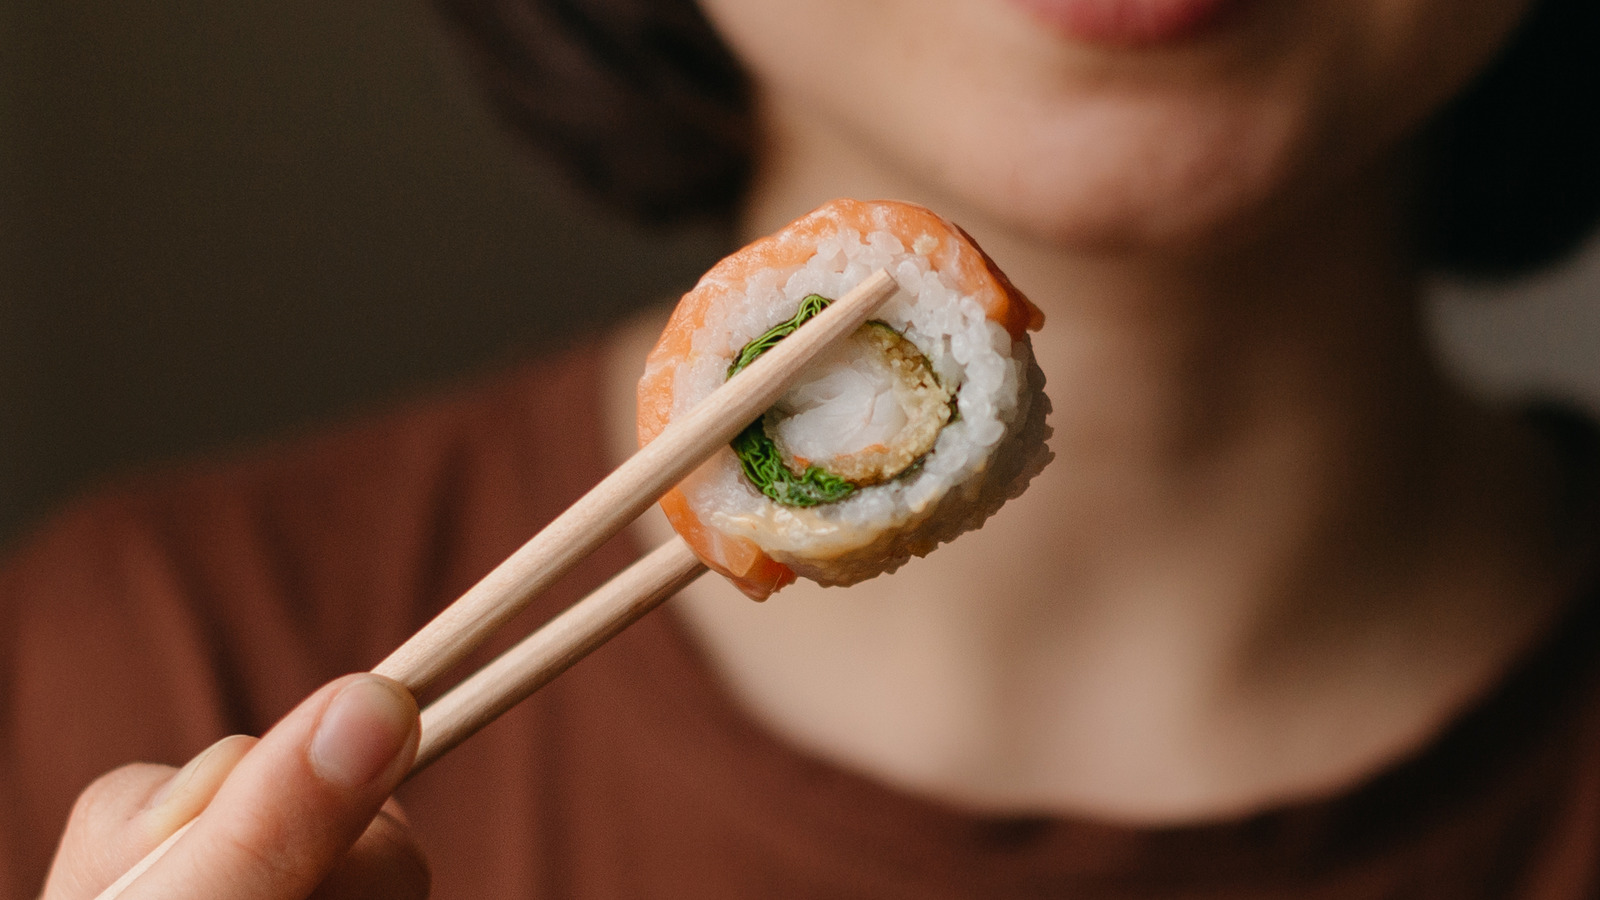 https://www.thedailymeal.com/img/gallery/the-ultimate-guide-to-all-6-different-types-of-sushi/l-intro-1660577338.jpg